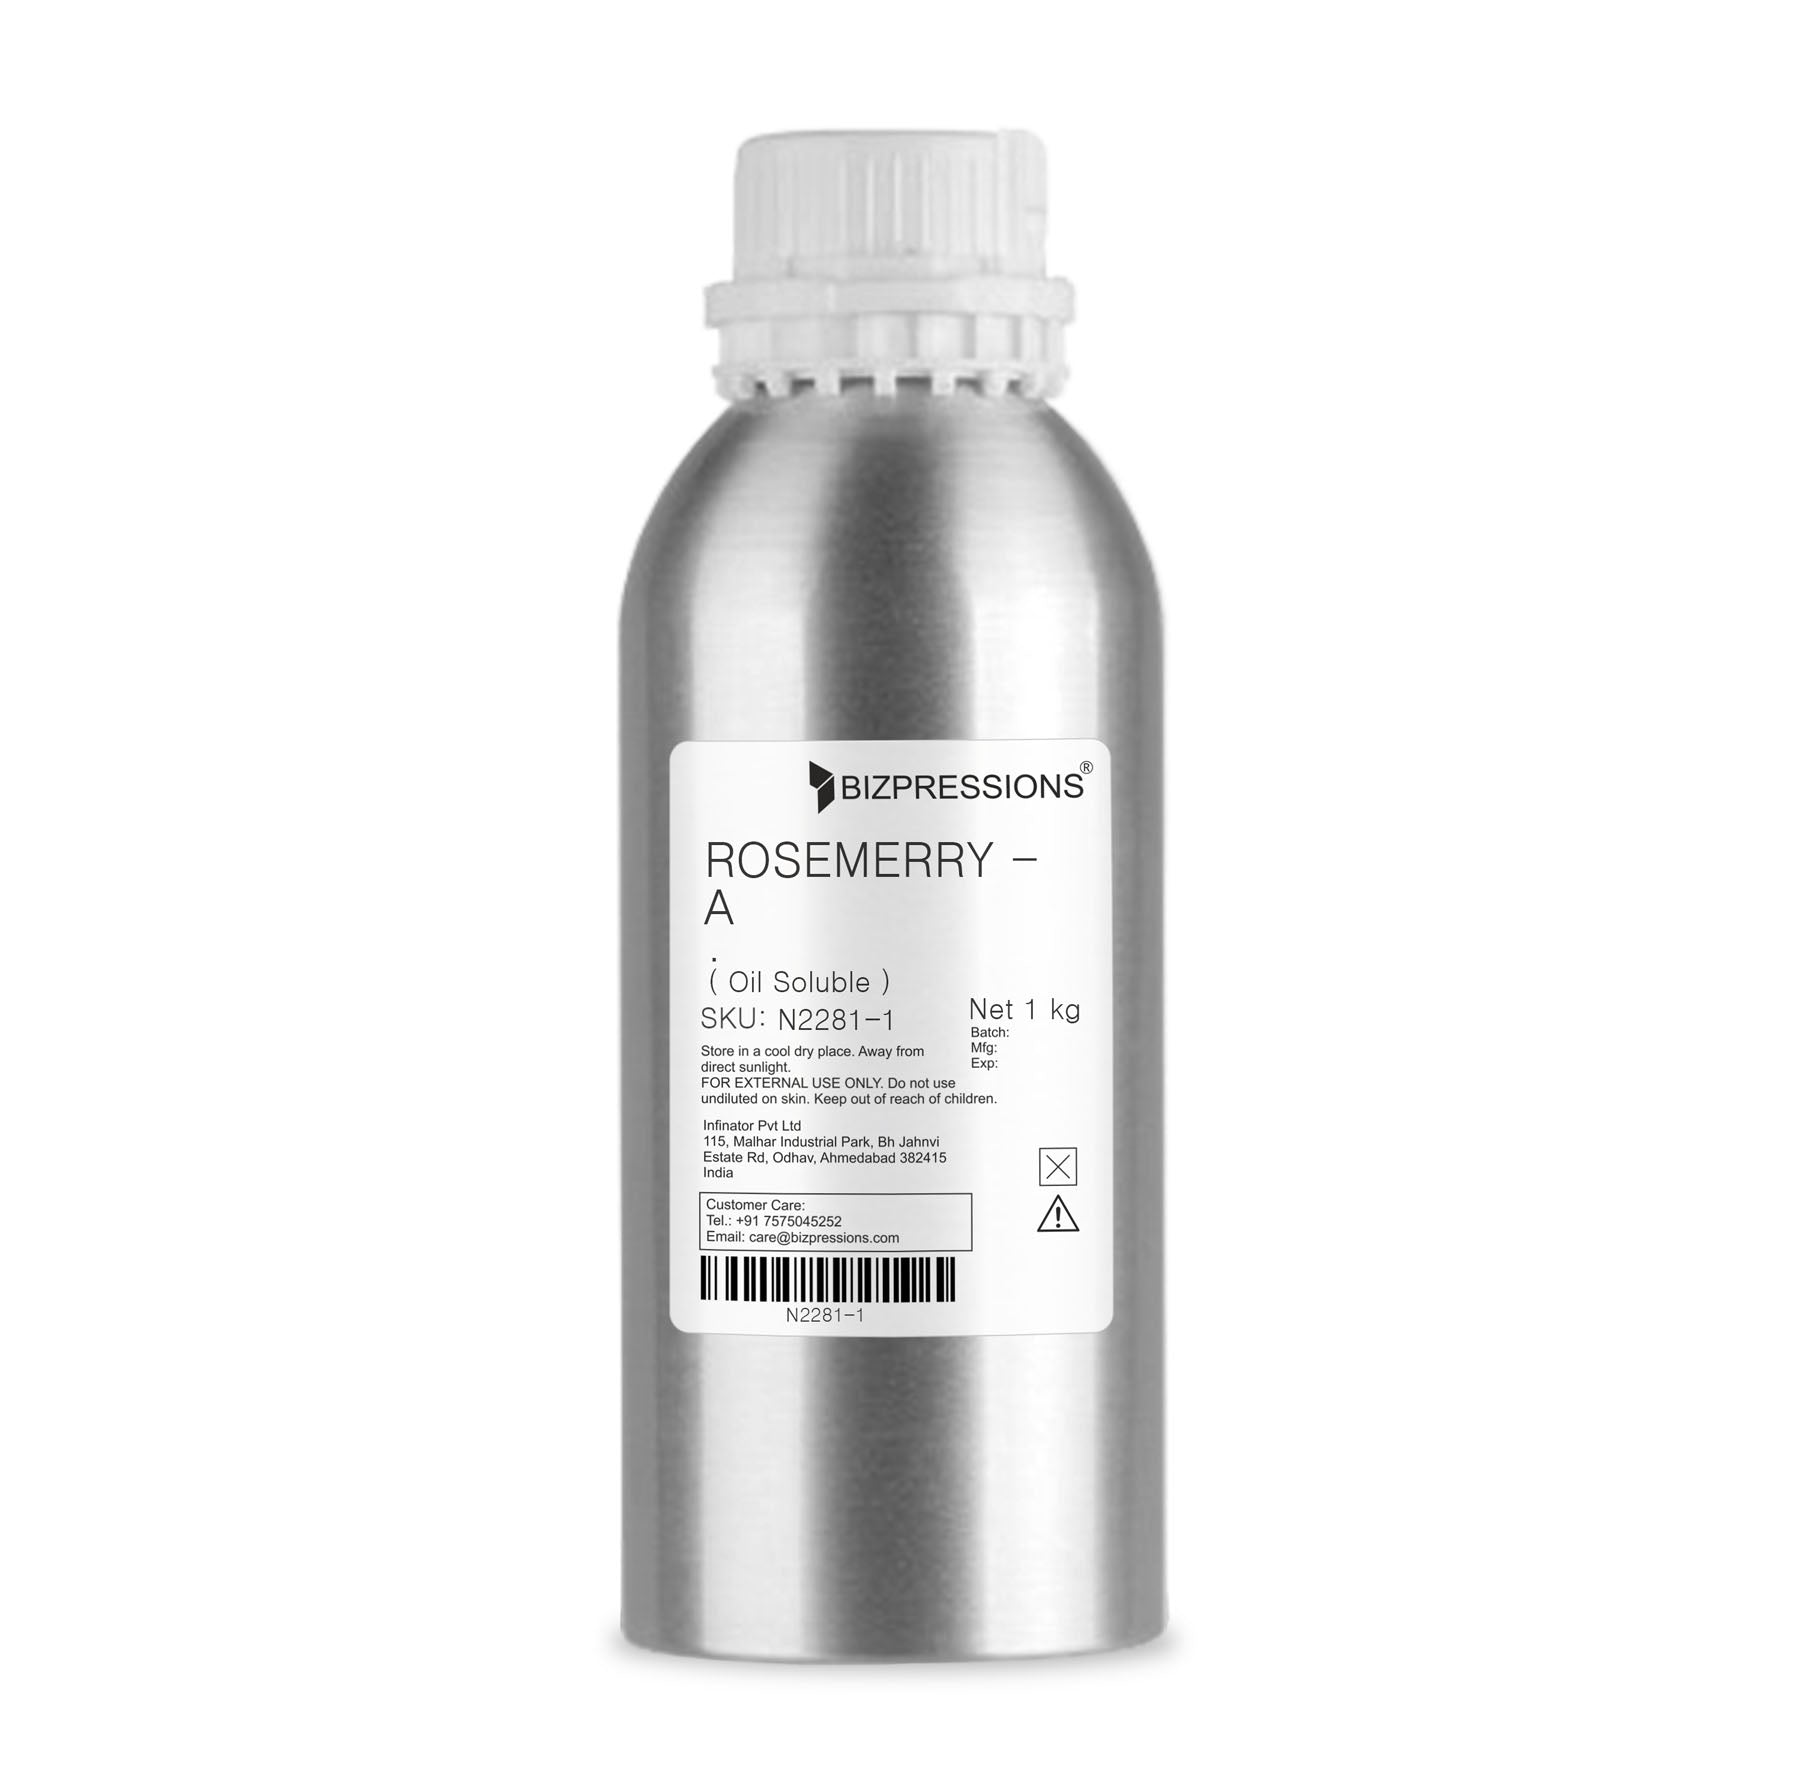 ROSEMERRY - A - Fragrance ( Oil Soluble ) - 1 kg